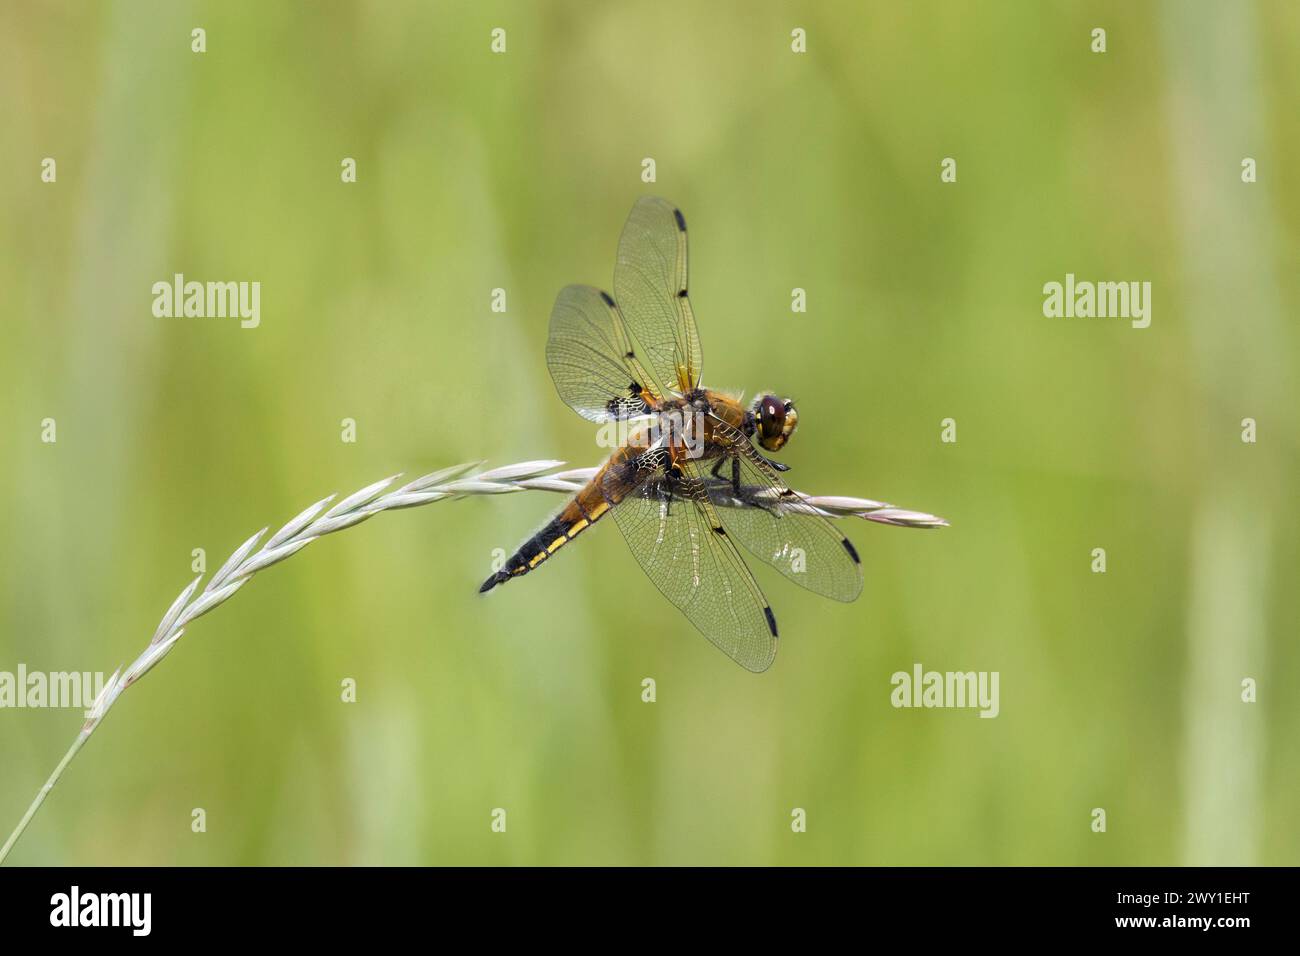 Dragonfly sits on dry grass on a green background close up Stock Photo